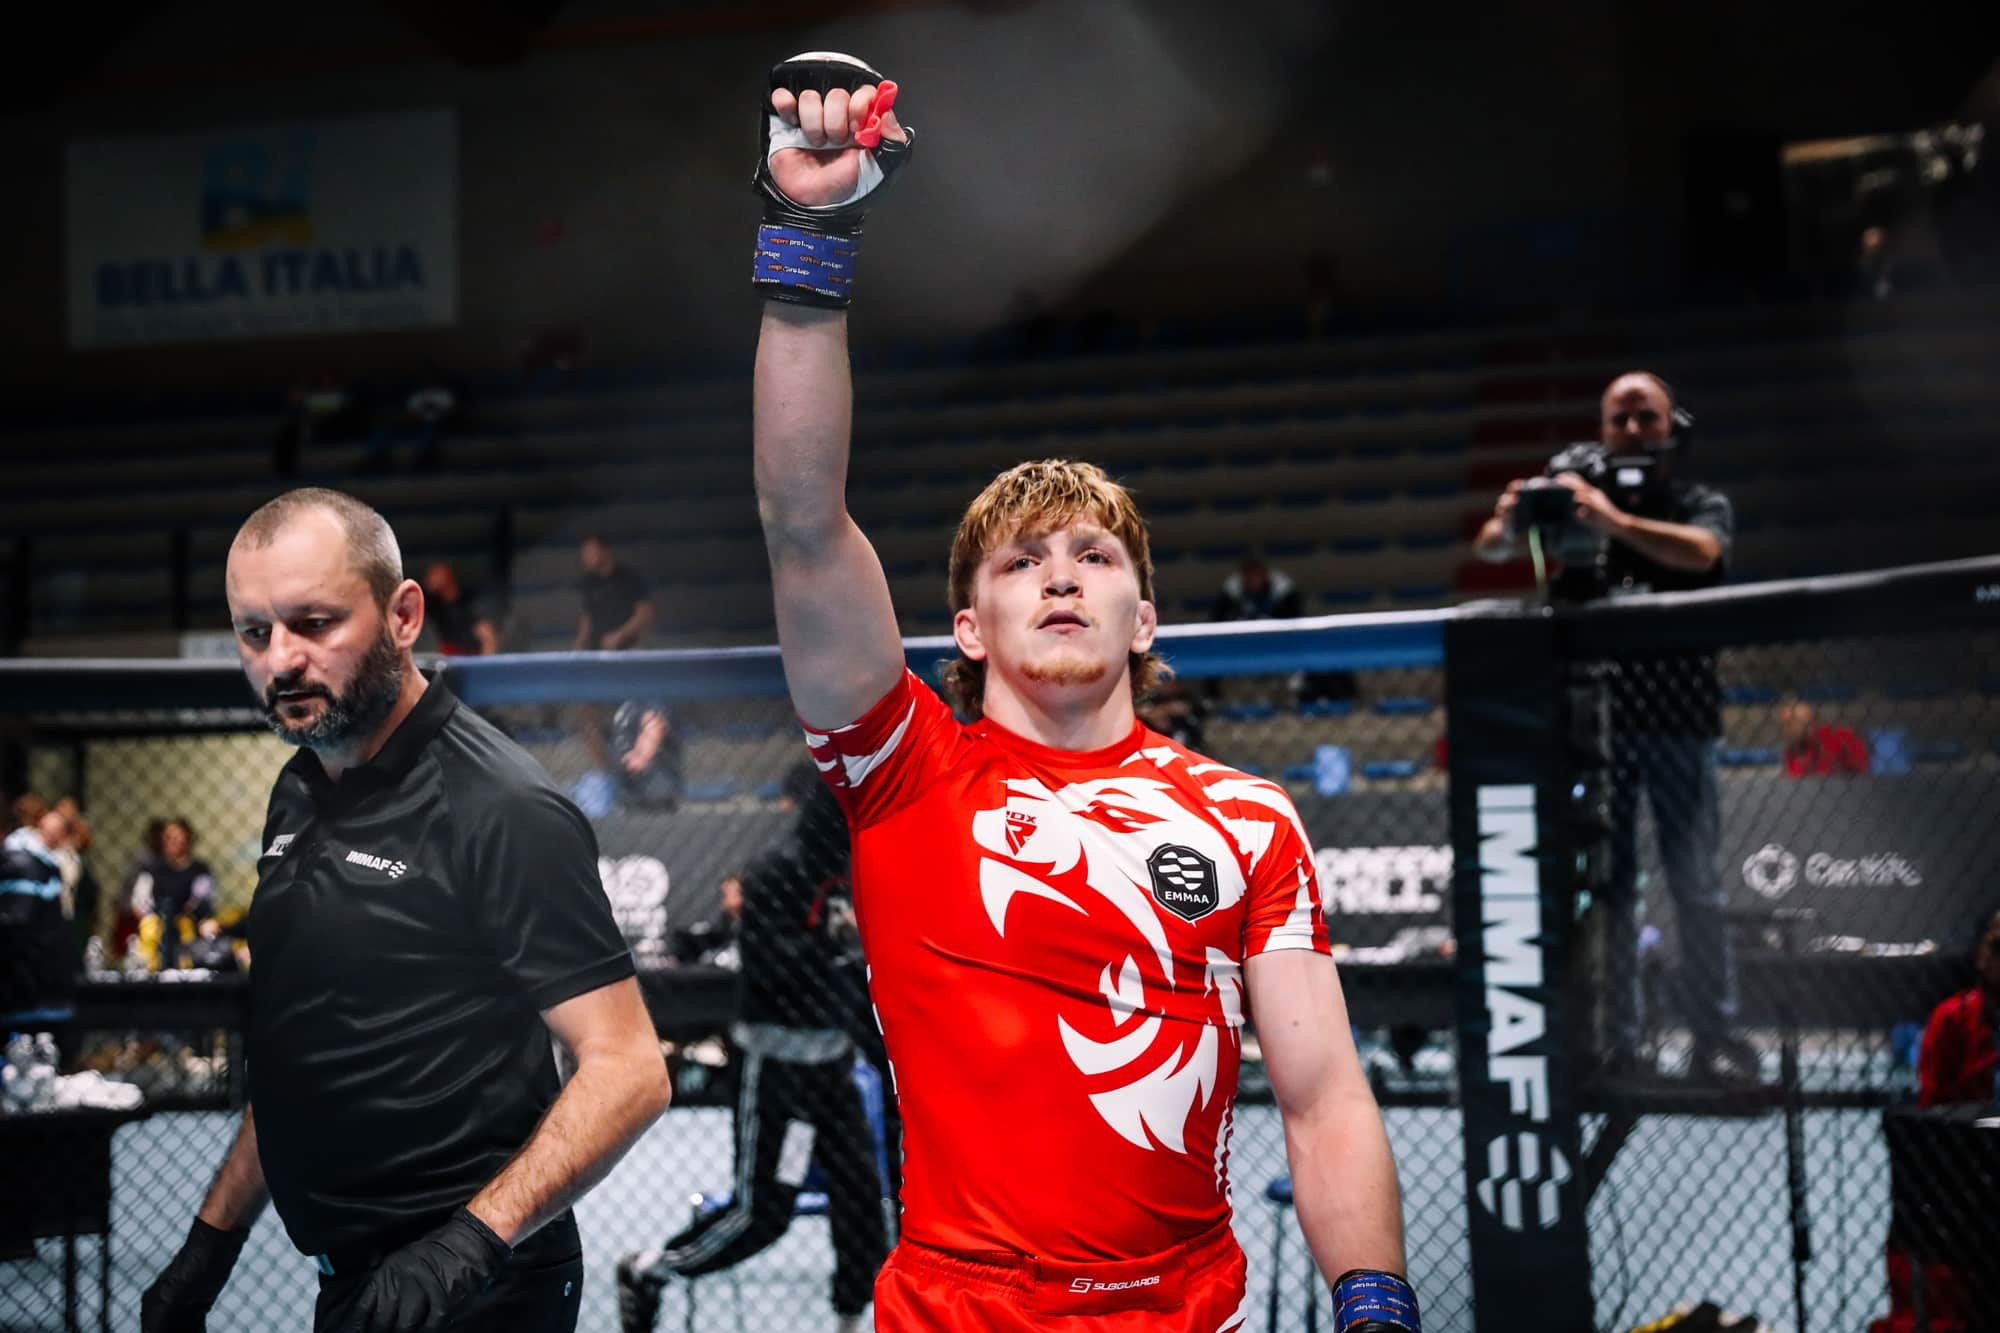 Teddy Stringer made an impressive return to the IMMAF ring ©IMMAF